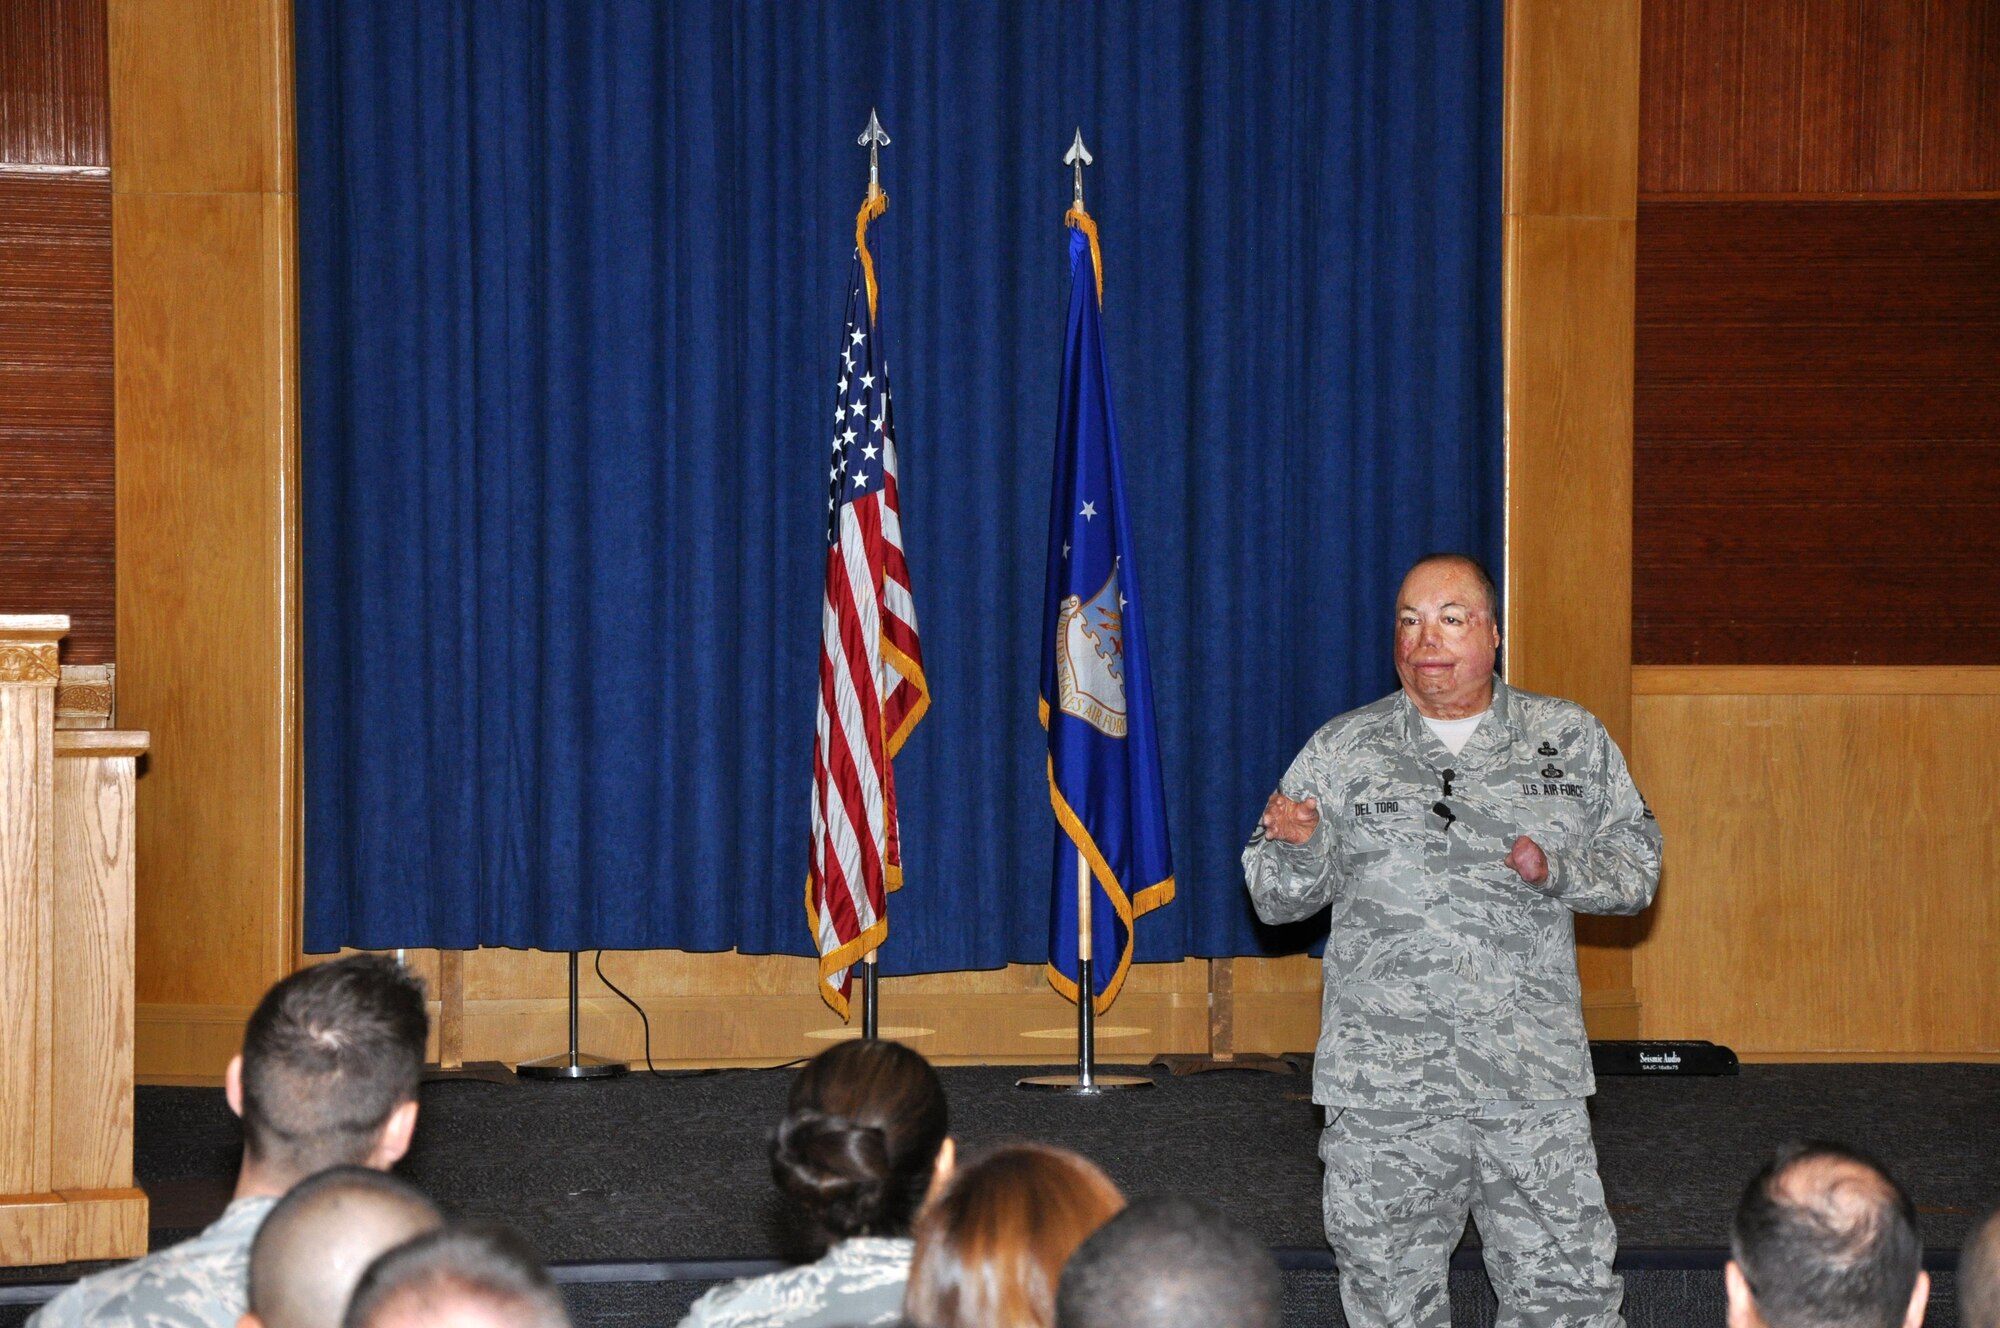 MSgt. Israel Del Toro, the first 100 percent-disabled Airman to reenlist in the Air Force, speaks to attendees at 340 Flying Training Wing’s 2016 Enlisted Development Summit at Joint Bases San Antonio-Lackland and Randolph, Texas Aug. 4 to 6. Del Toro, a tactical air control party member was severely injured by an improvised explosive device while serving in Afghanistan. He was burned over more than 80 percent of his body, spent three months in a coma and was given less than a 20 percent chance of survival. Del Toro delivered an inspiring and memorable speech that emphasized service before self and teamwork. (U.S. Air Force Photo/CMSgt. Jimmie Morris)